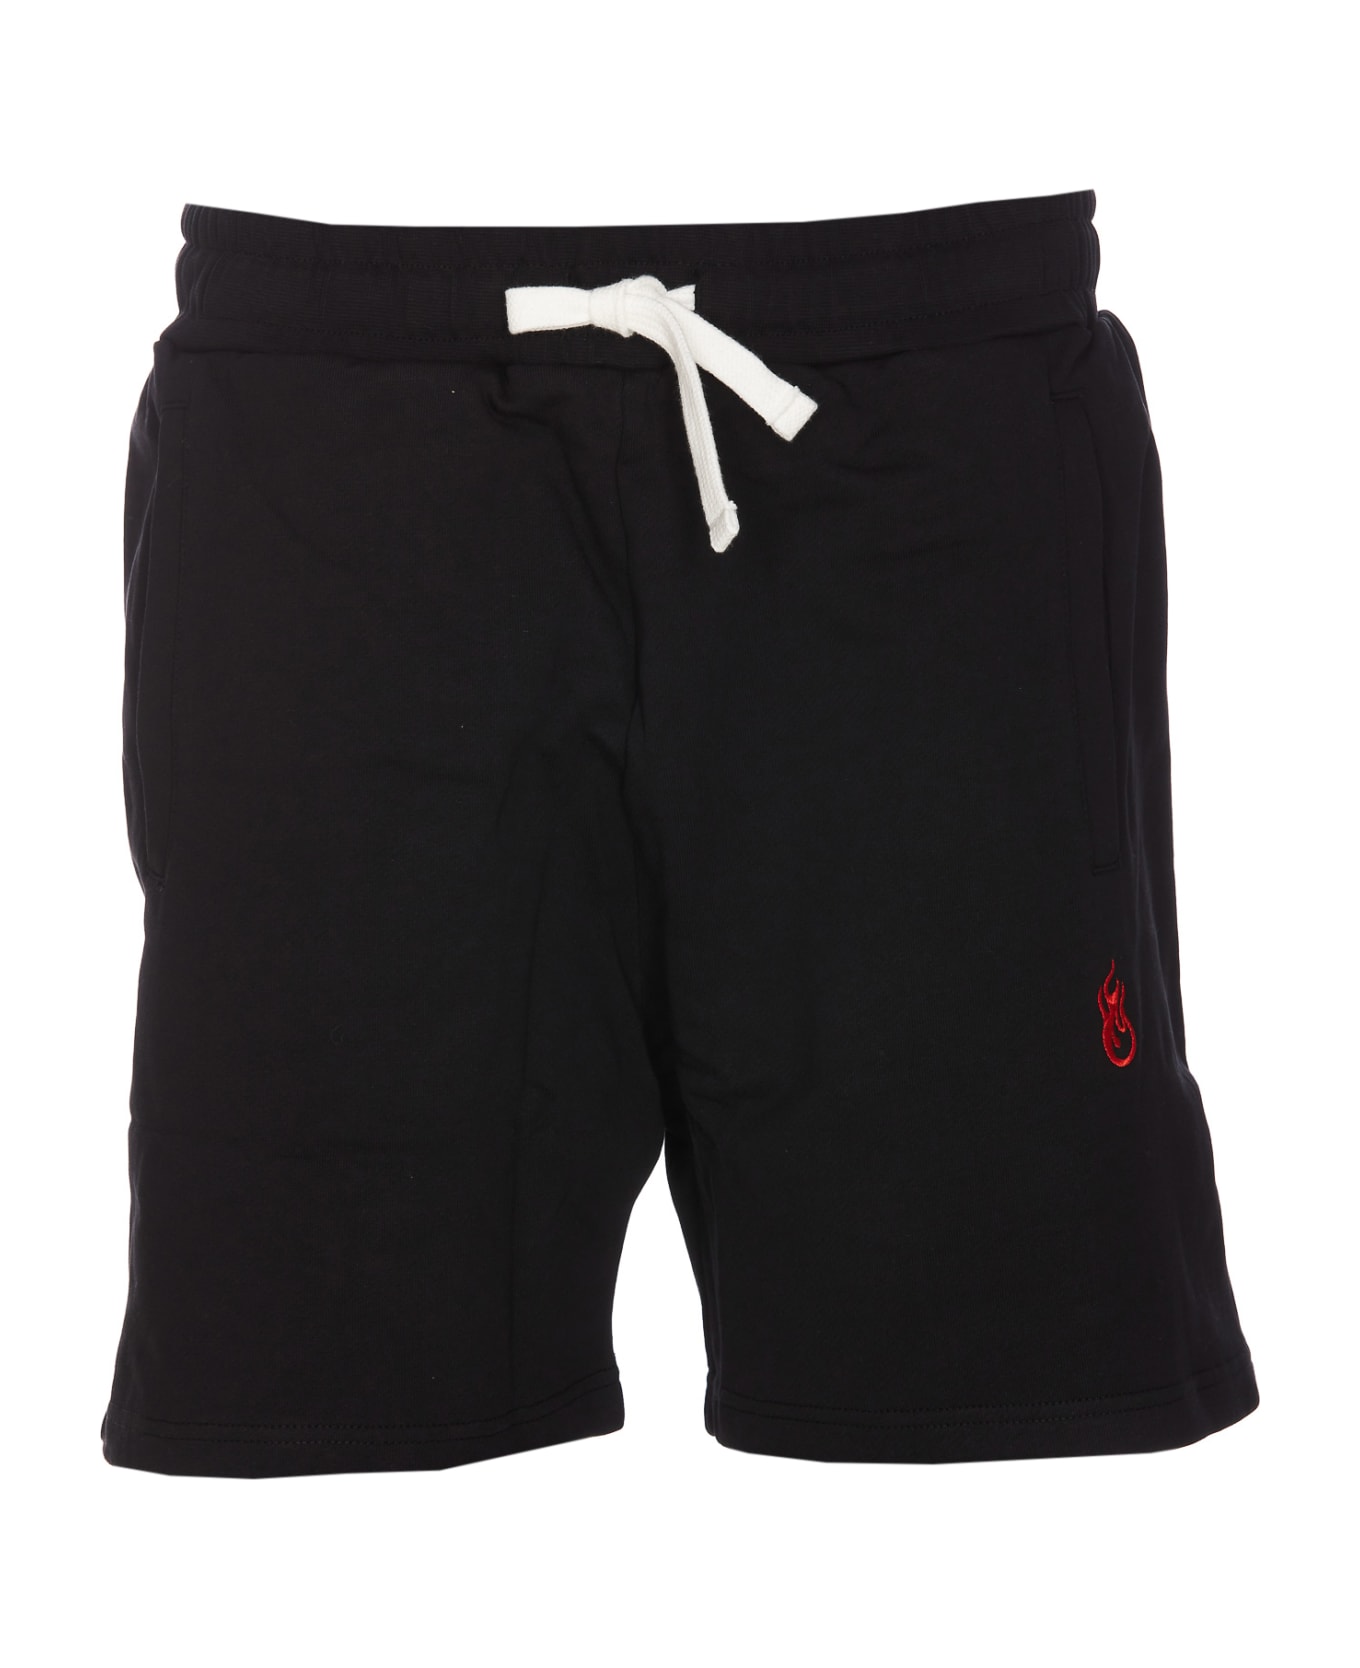 Vision of Super Shorts With Flames Logo - Black ショートパンツ